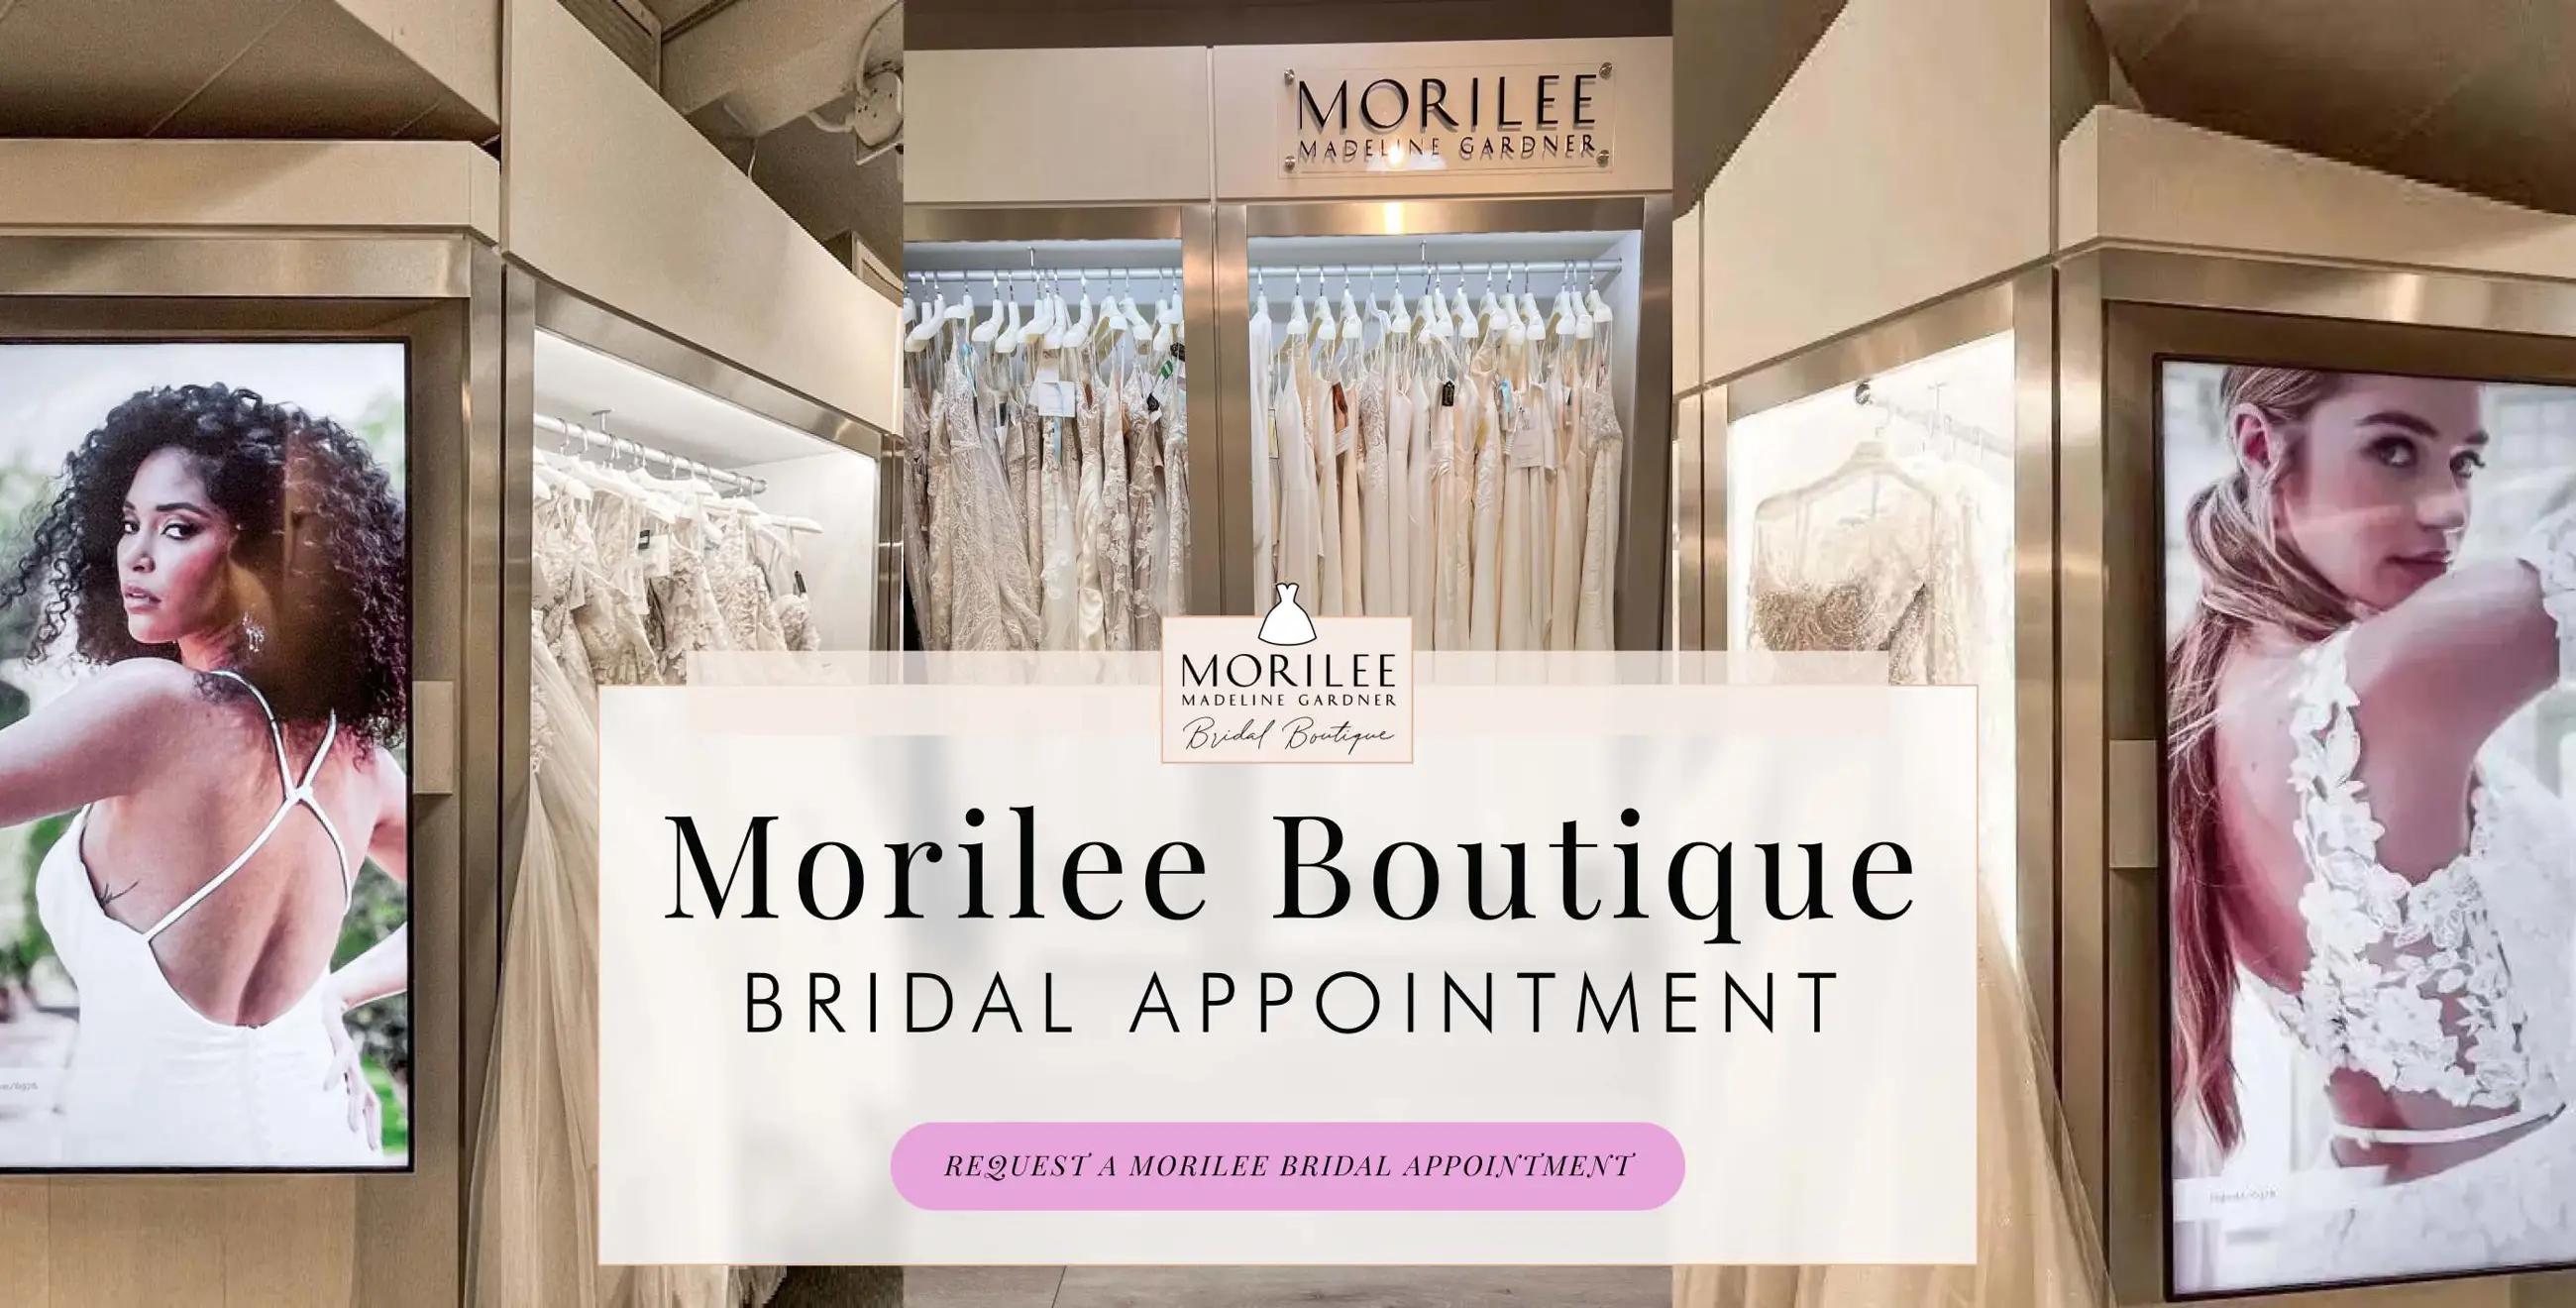 Morilee boutique appointments at Trudys Brides